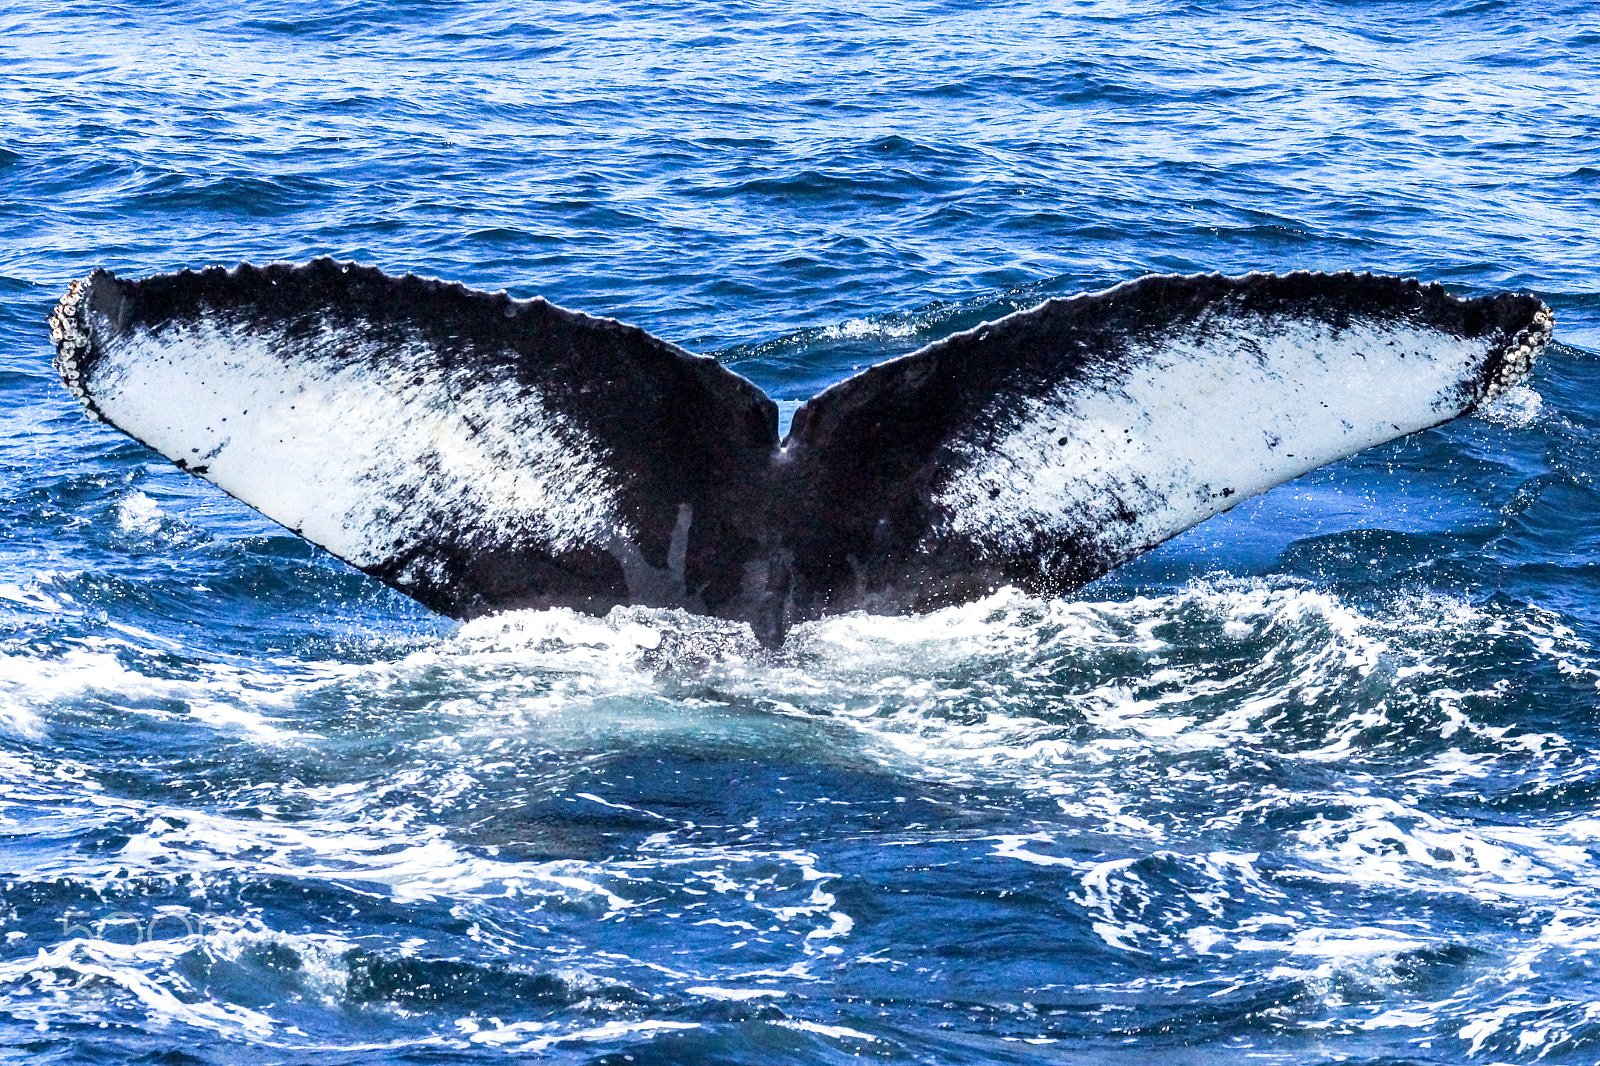 Sony SLT-A77 sample photo. A humpback whale's tail as it dives down under the ocean photography